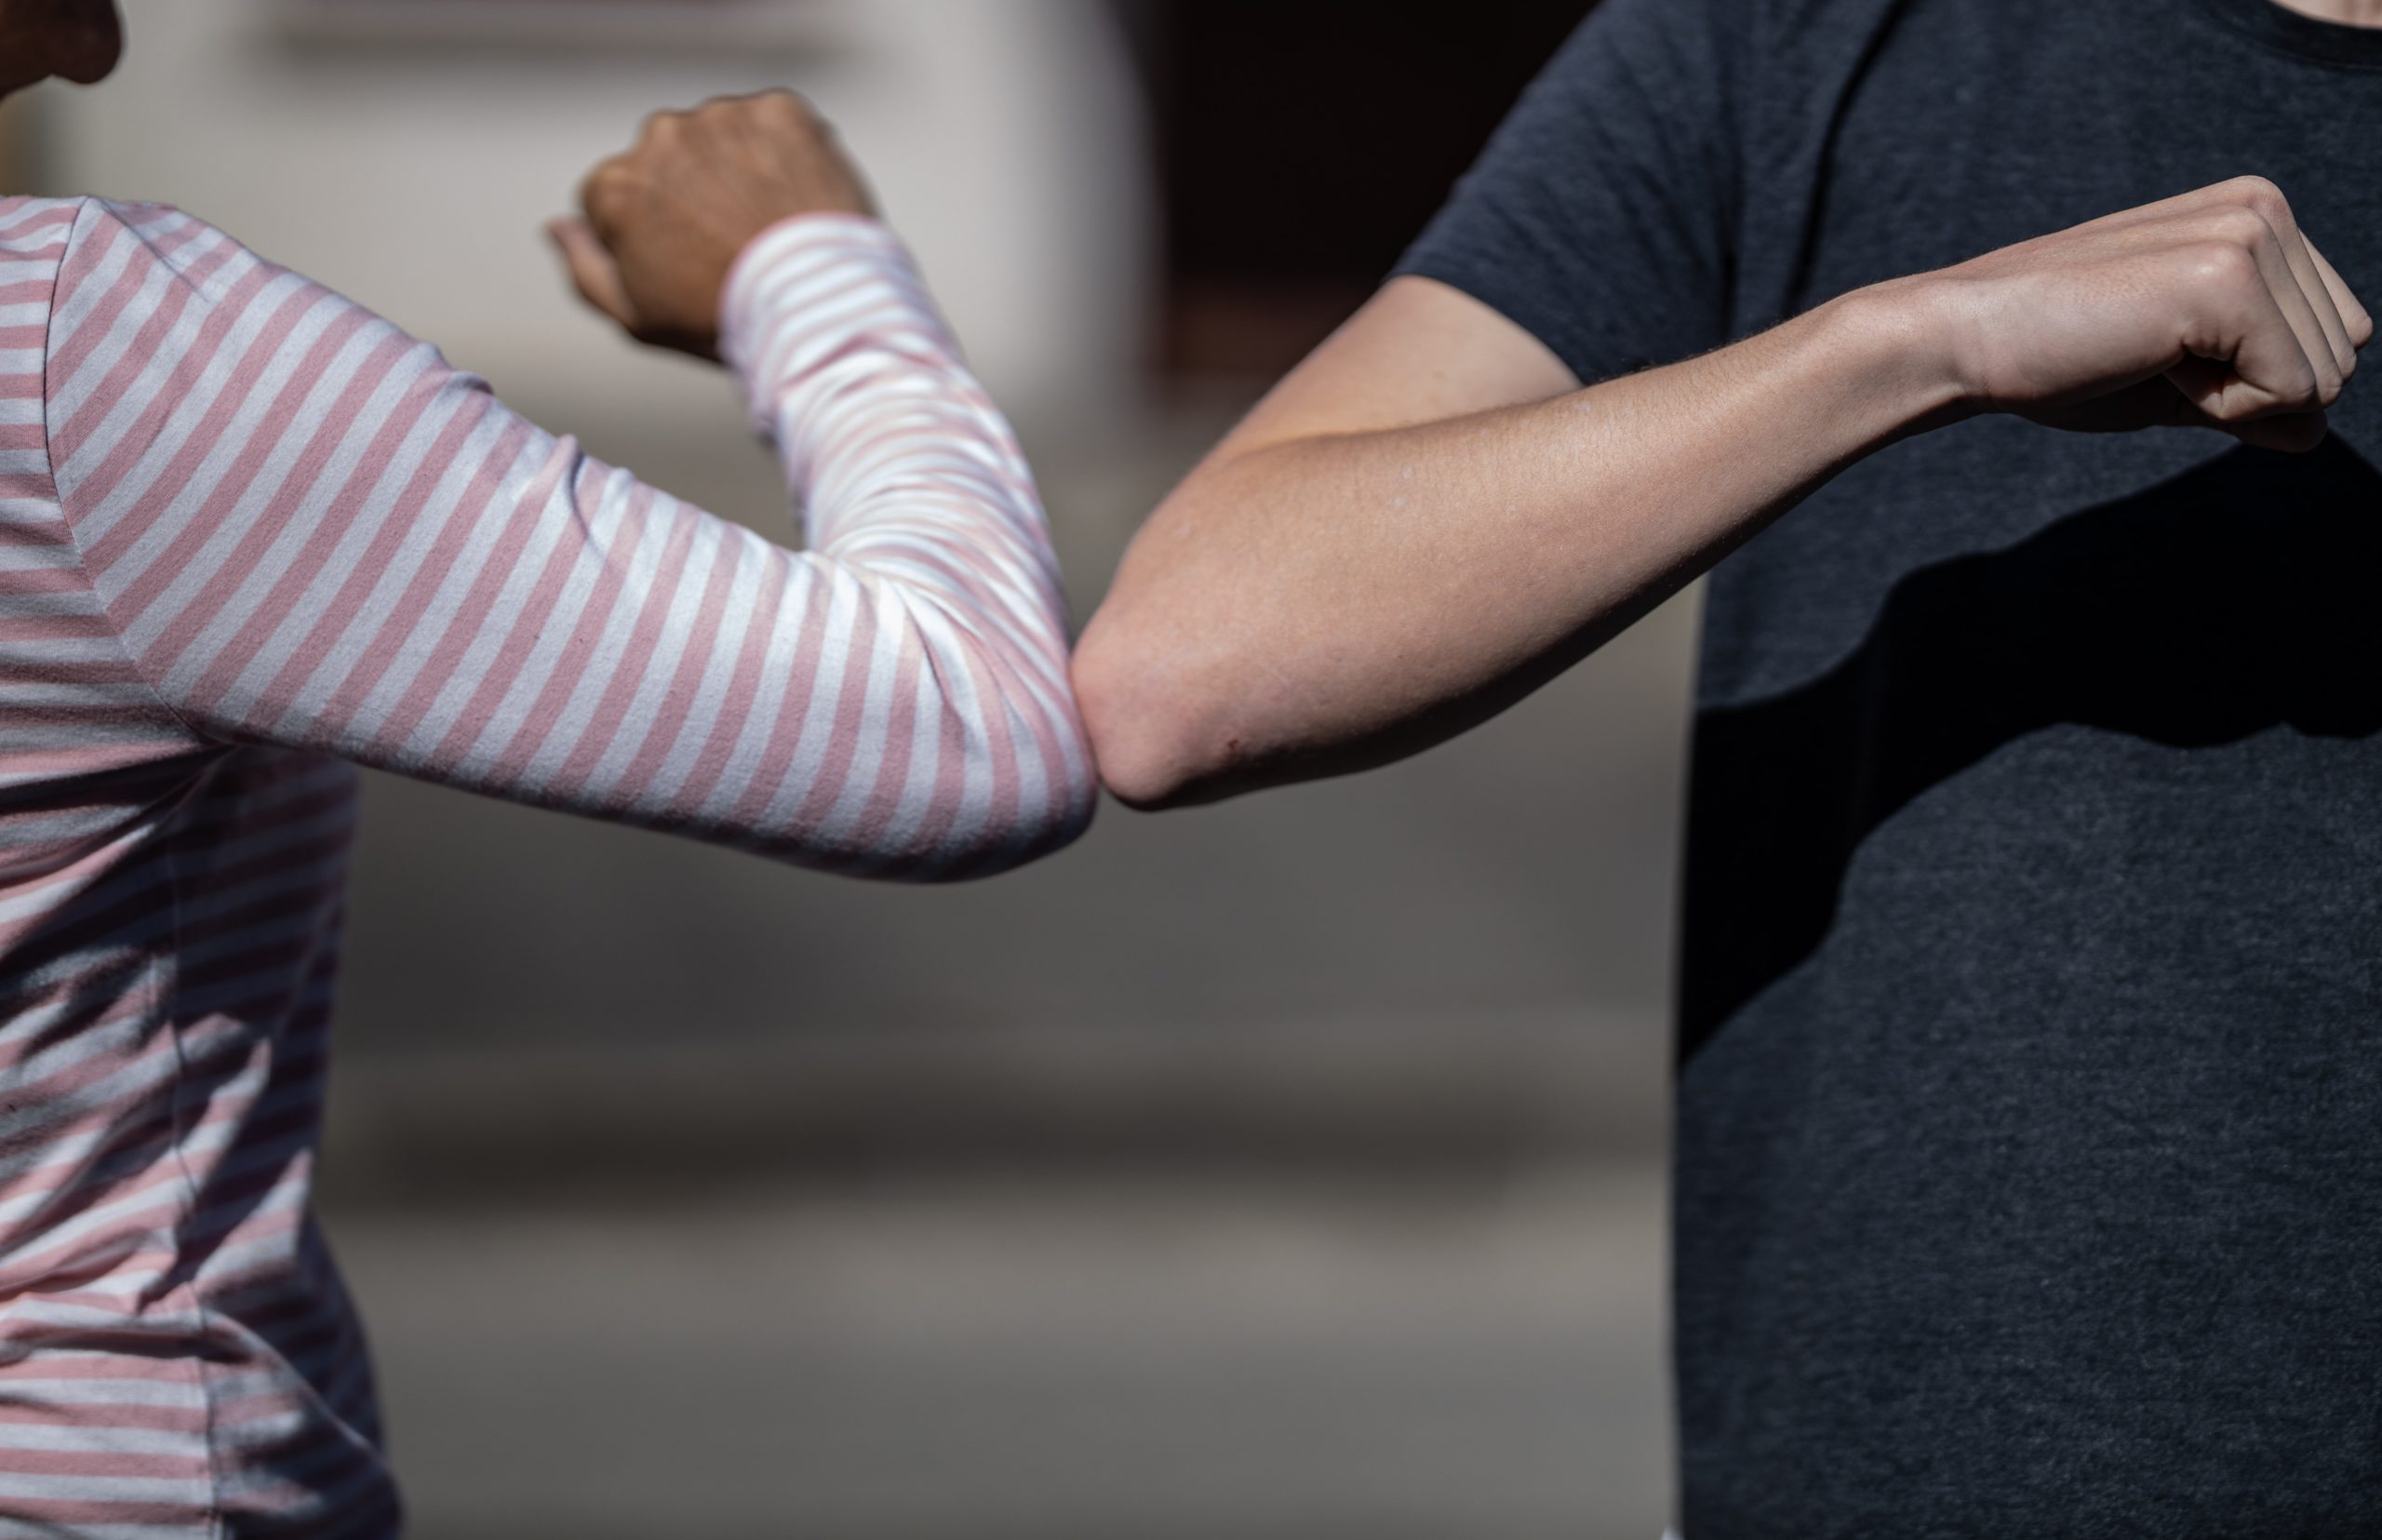 Two people bumping elbows as a greeting to reduce contact and the spread of COVID-19. 